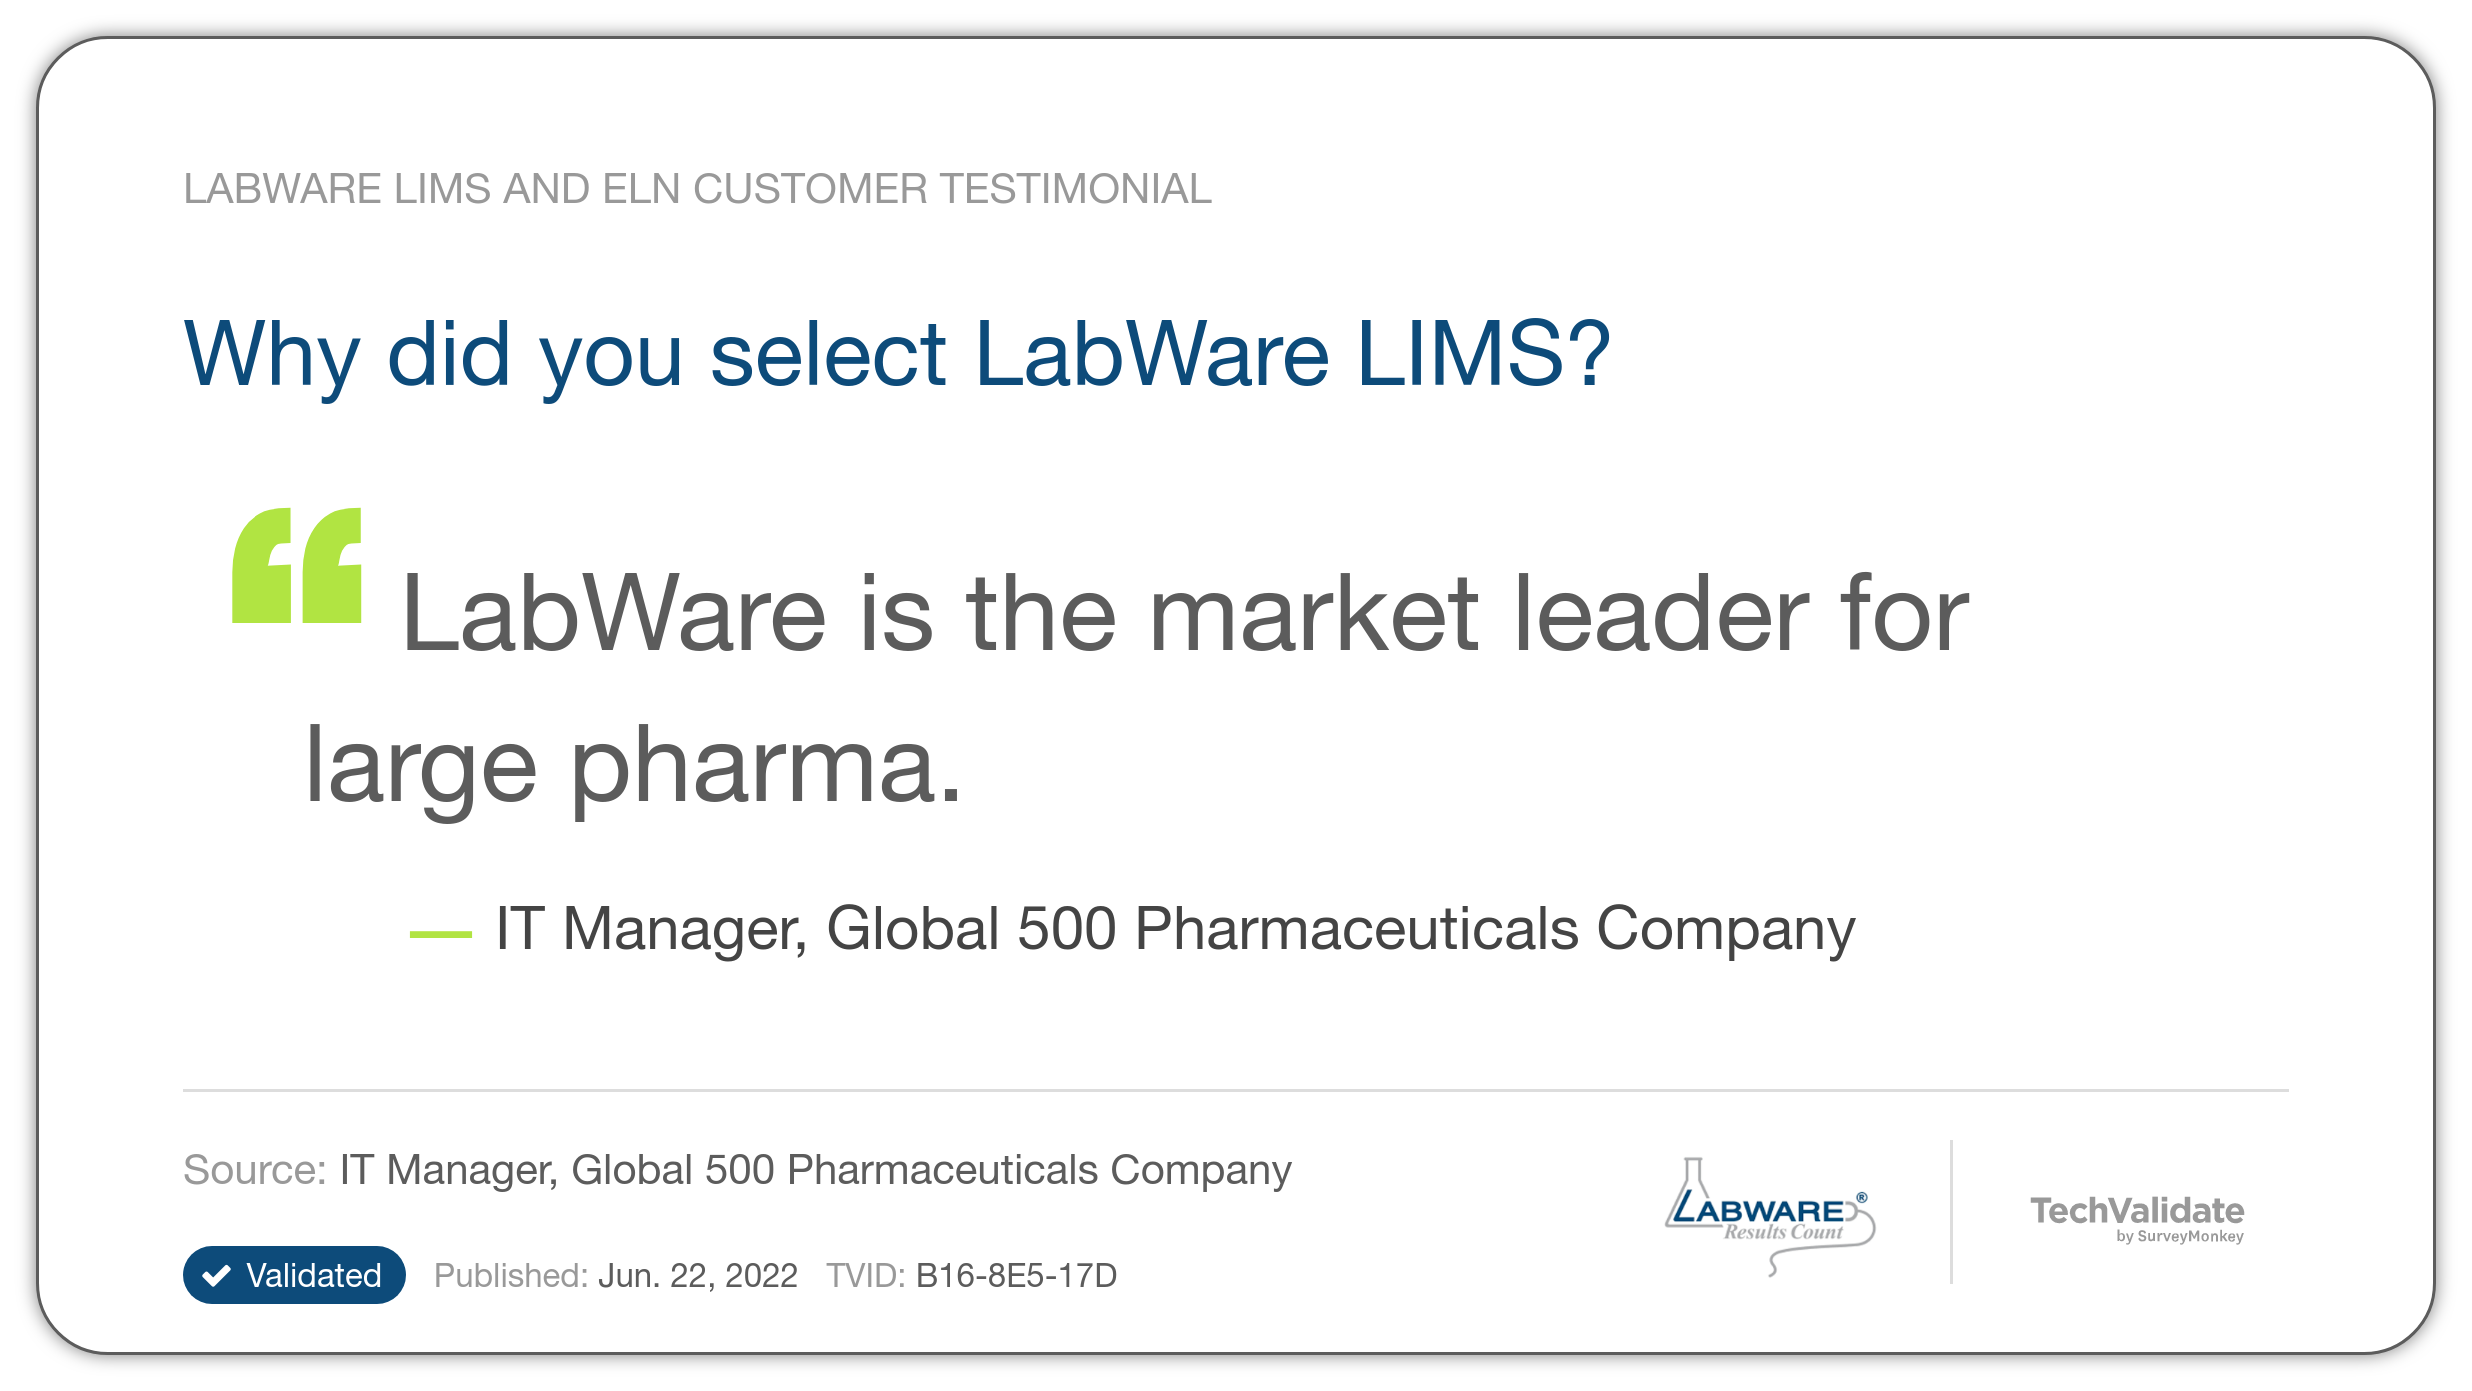 Why did you select LabWare LIMS?